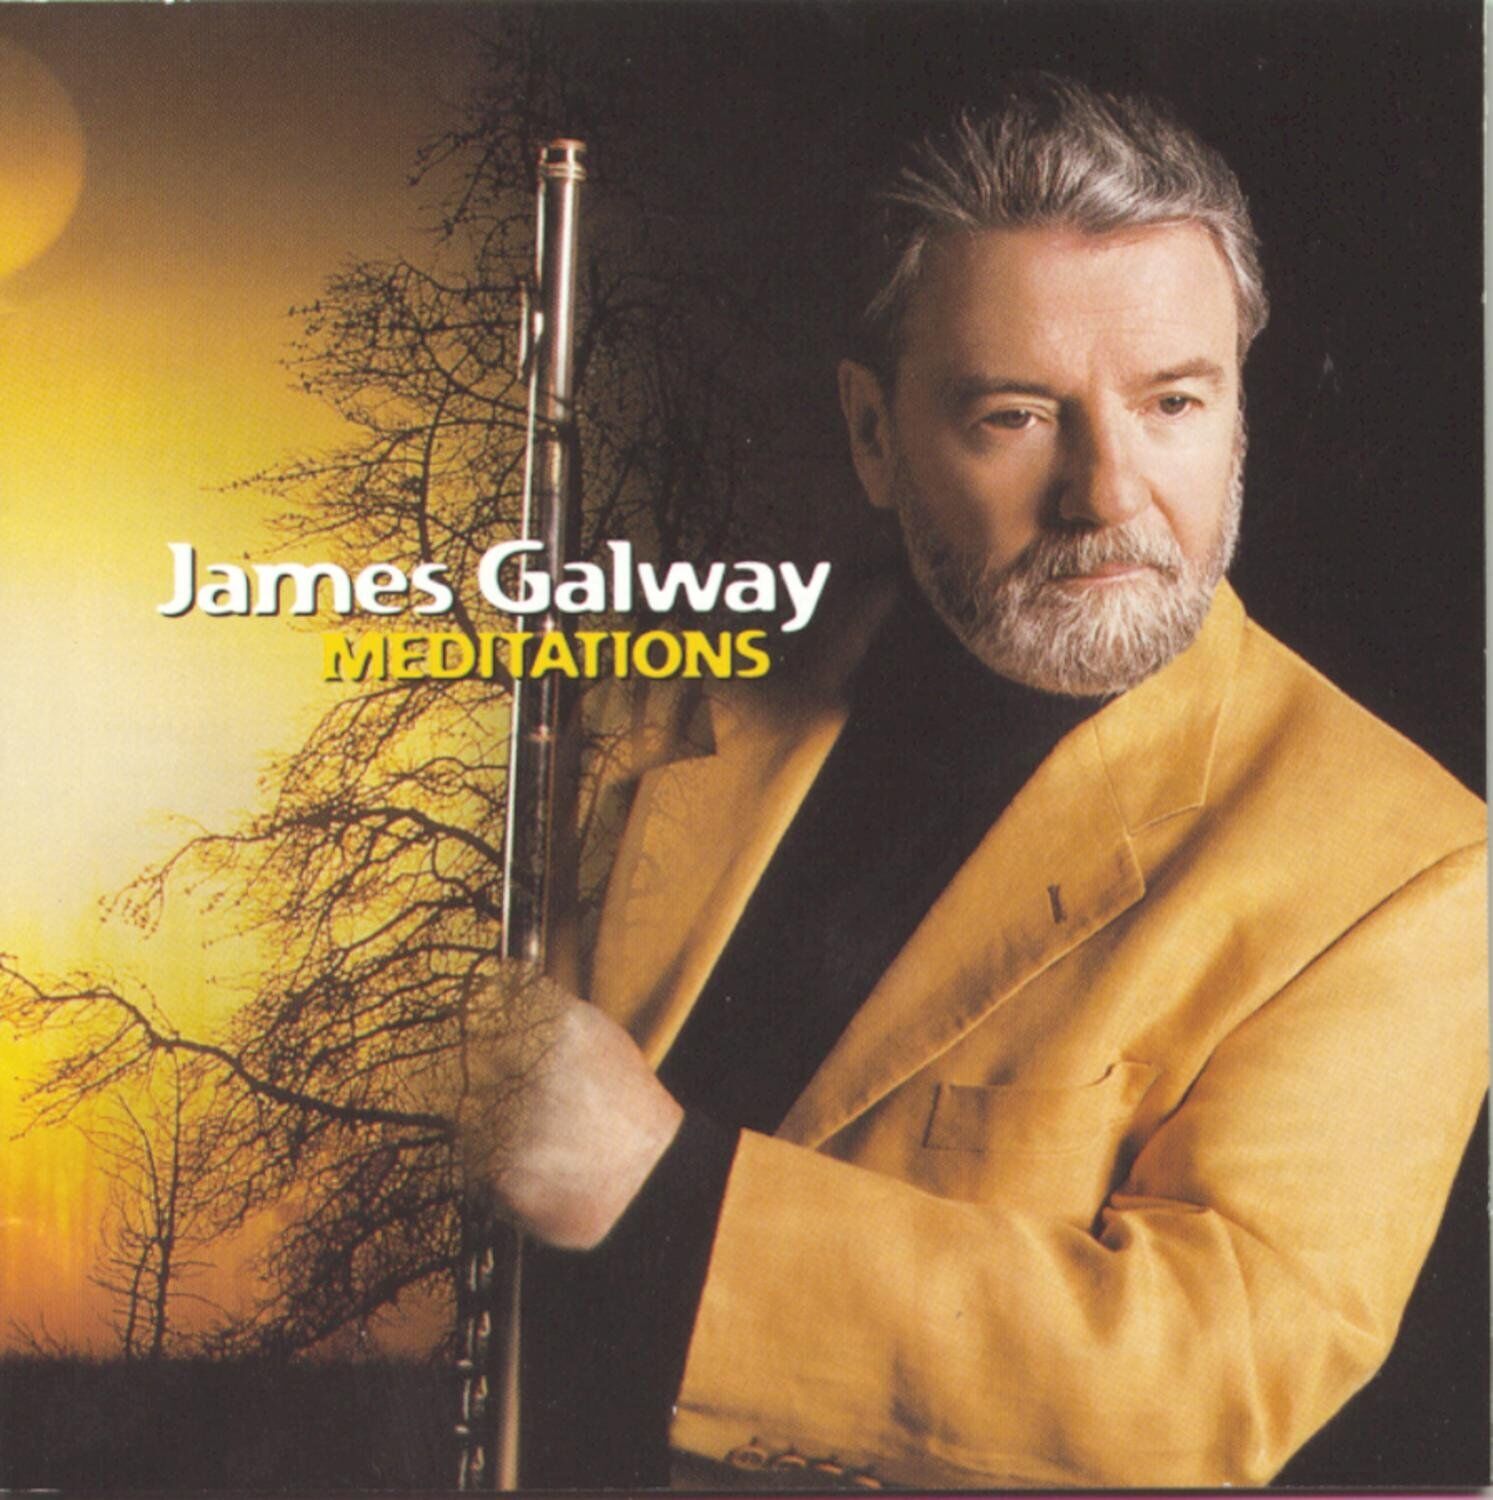 Meditations by James Galway (CD, 1998, 2 Discs, RCA)